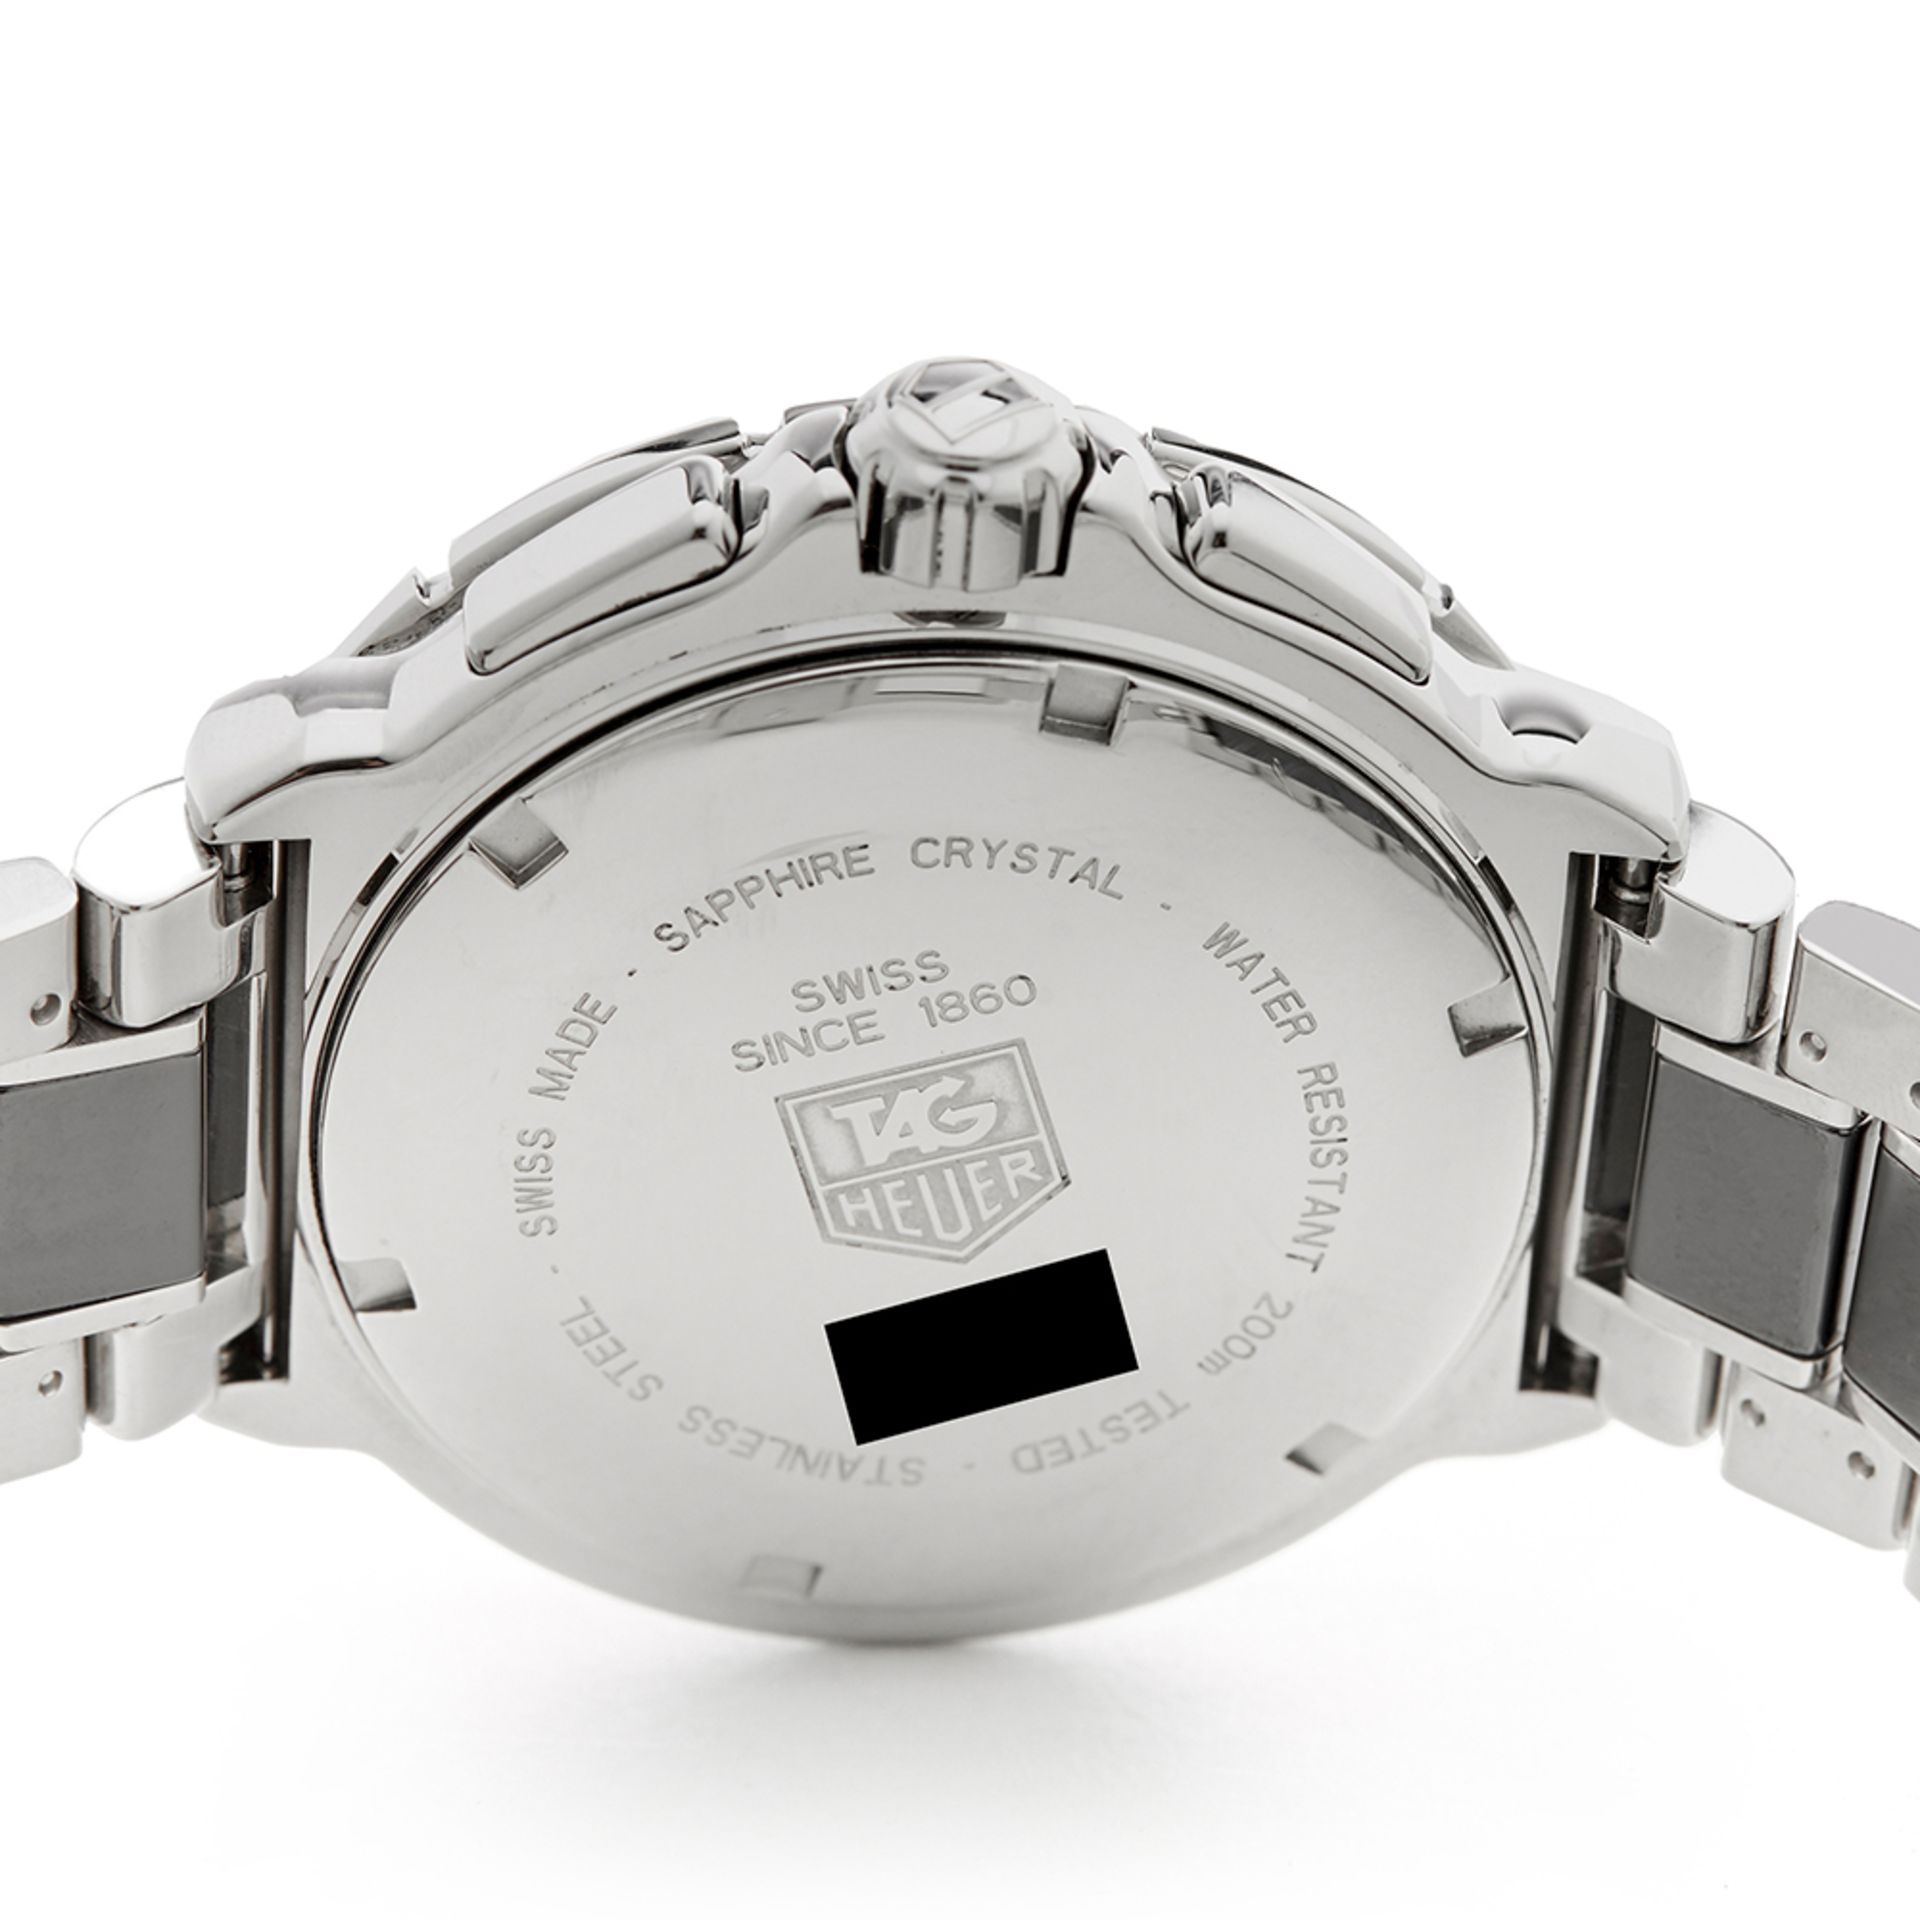 Tag Heuer Formula 1 CAH1210.BA0862 Unisex Stainless Steel Chronograph Watch - Image 5 of 9